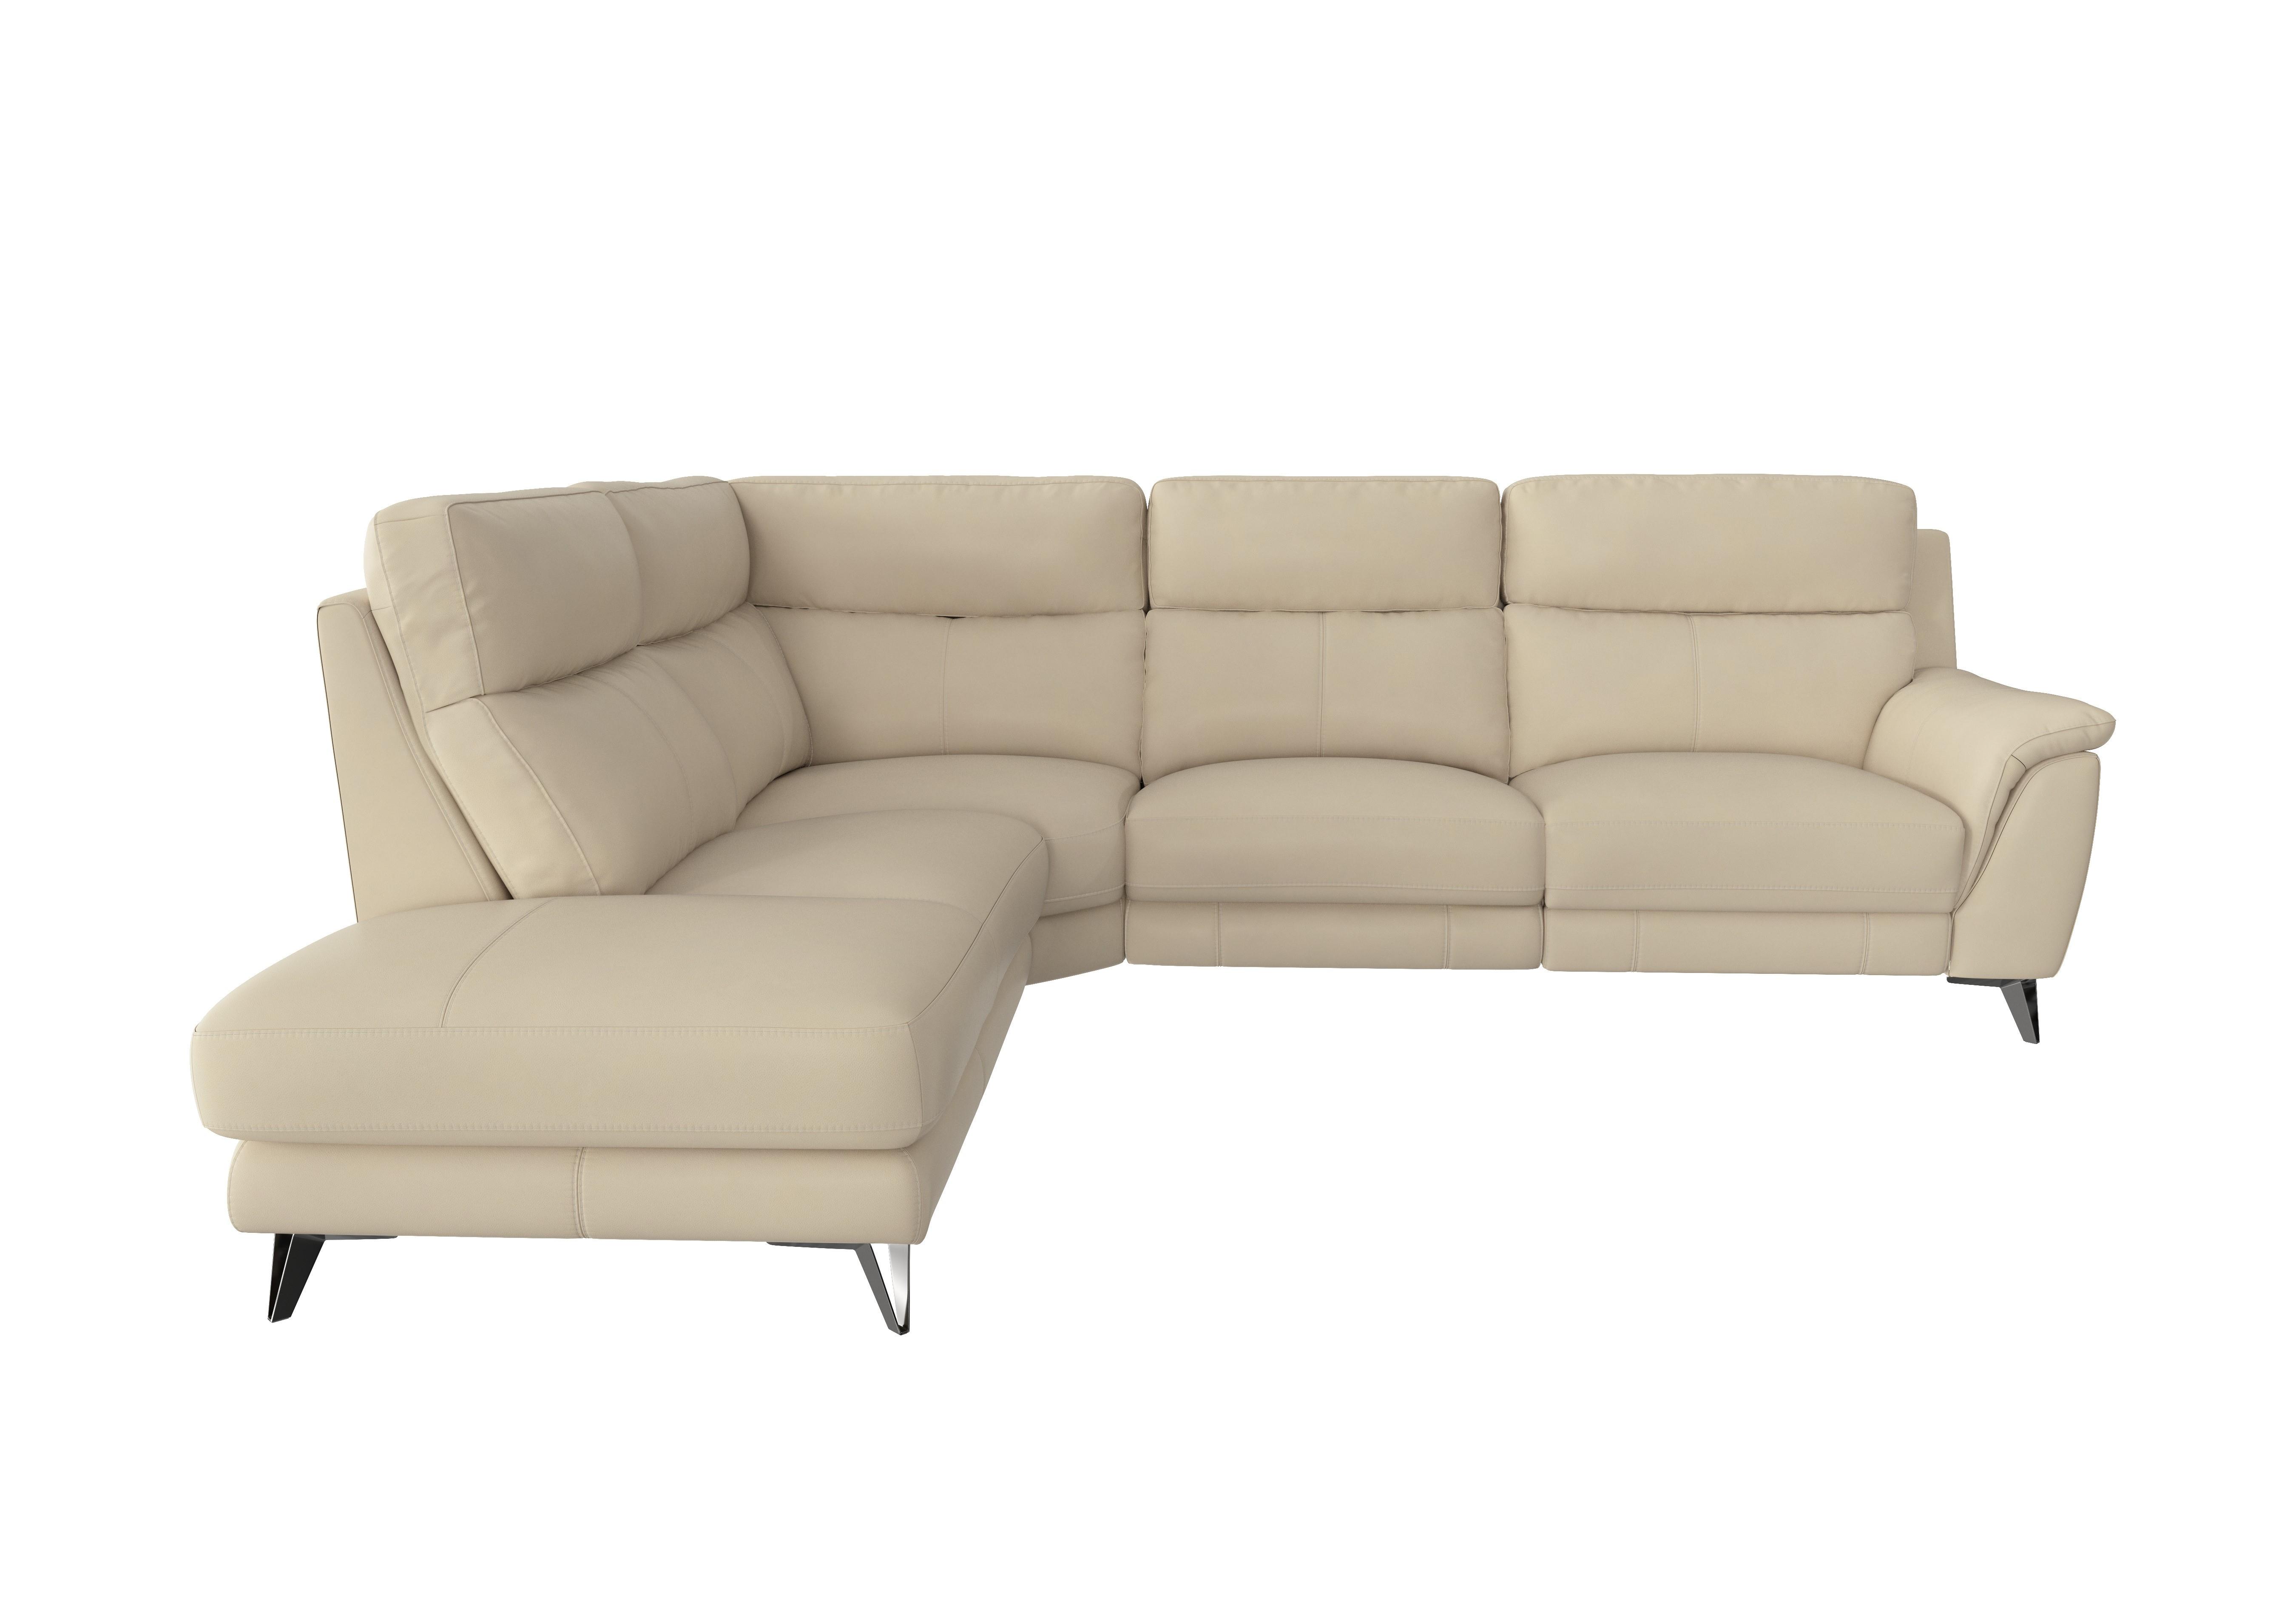 Contempo Chaise End Leather Sofa in Bv-862c Bisque on Furniture Village